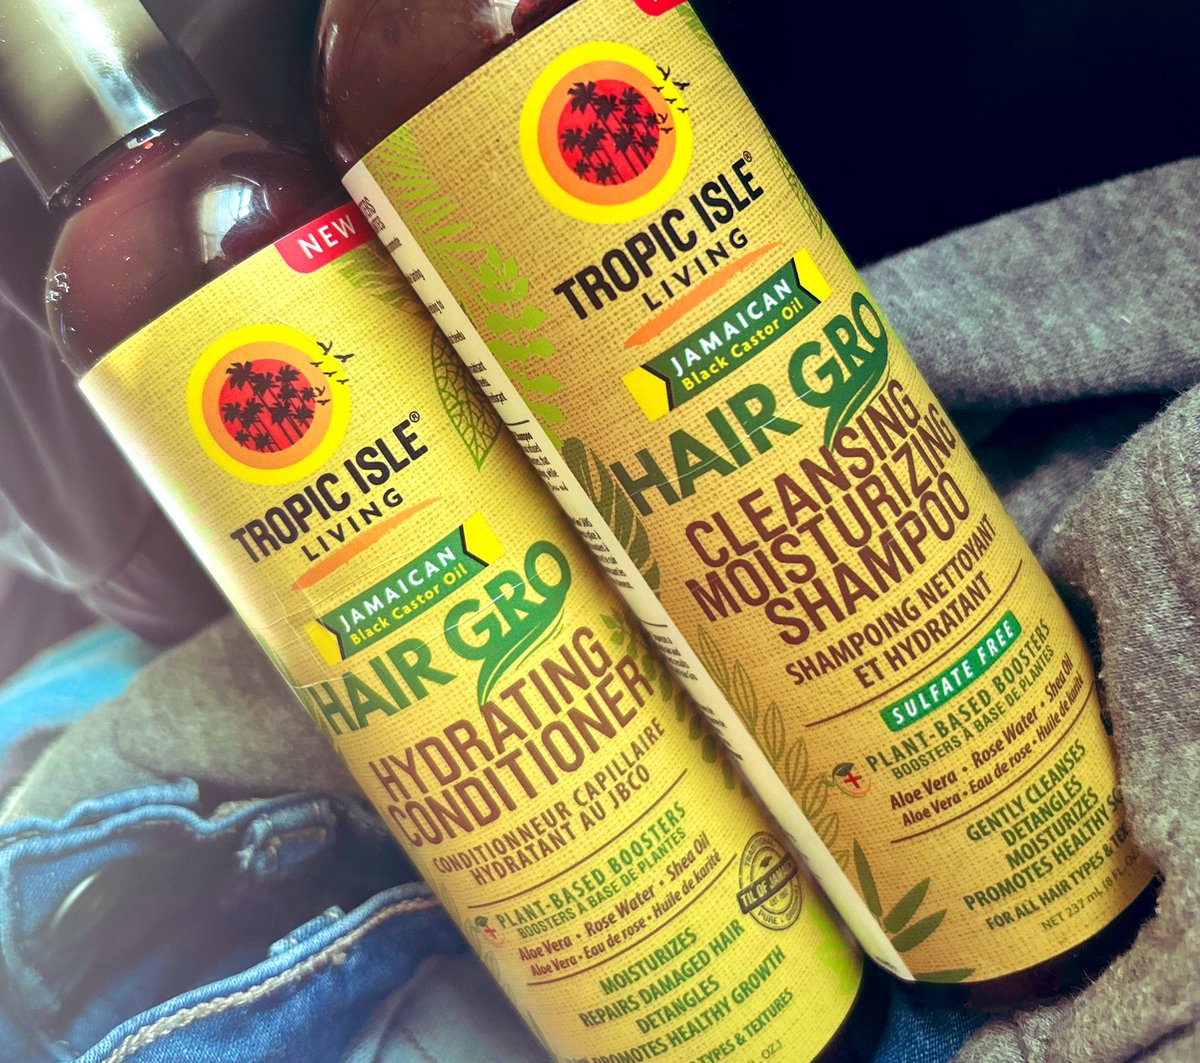 This shampoo and conditioner the truth 🥰😮‍💨😮‍💨😮‍💨💕 hair be nice , soft and moisturized